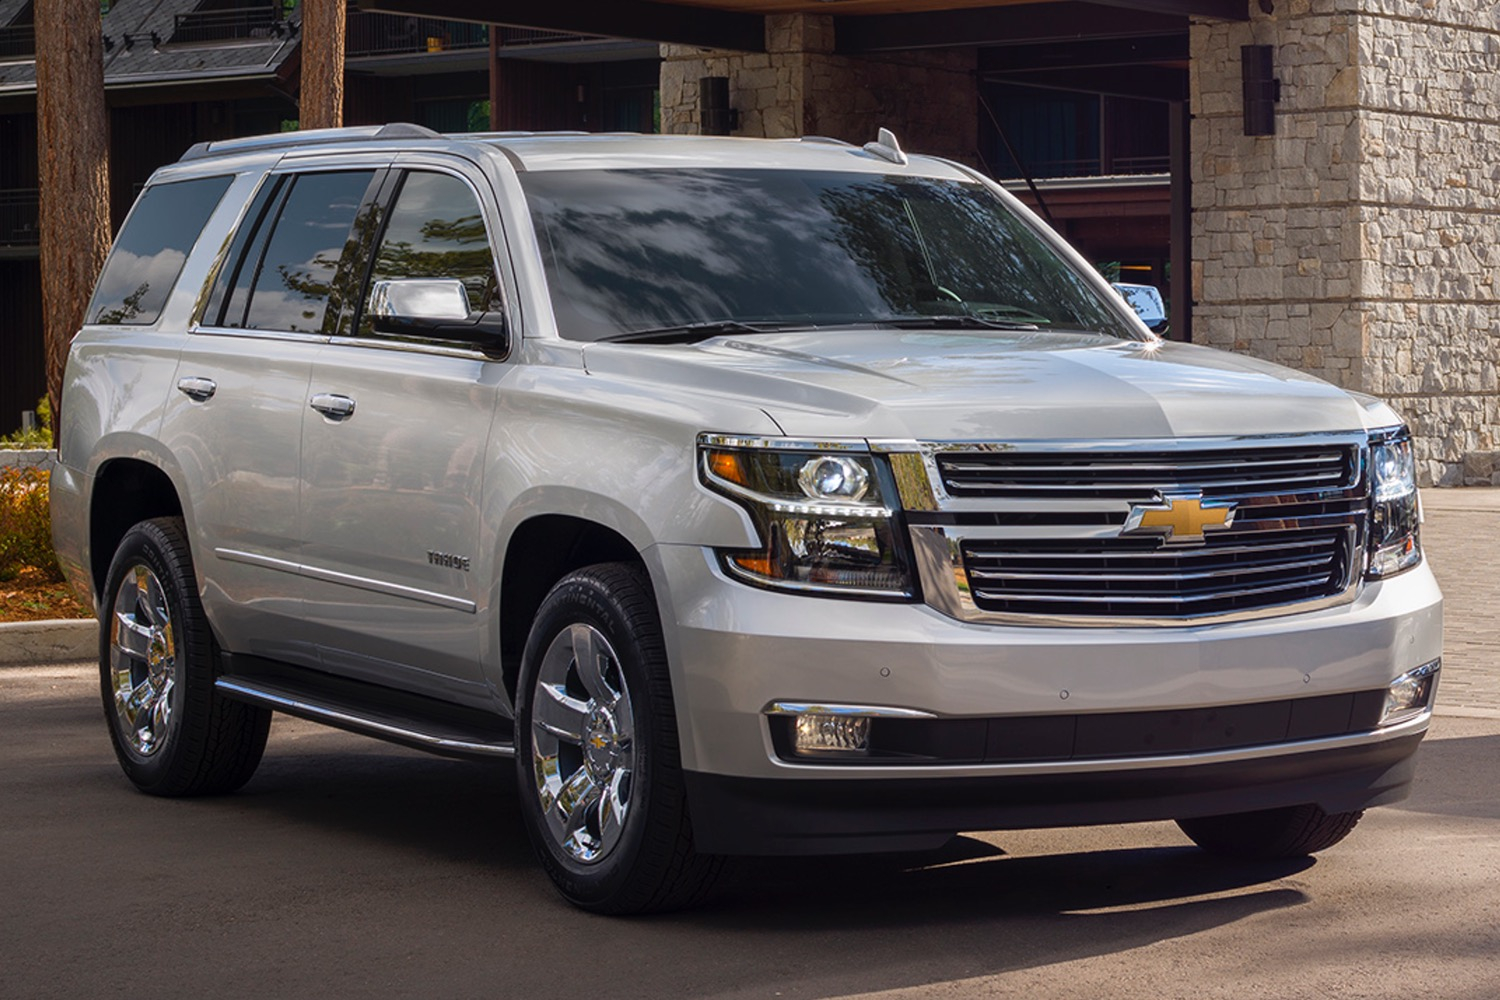 2022 Chevy Tahoe Lt Pictures, Package, 2Wd | 2022 Chevy